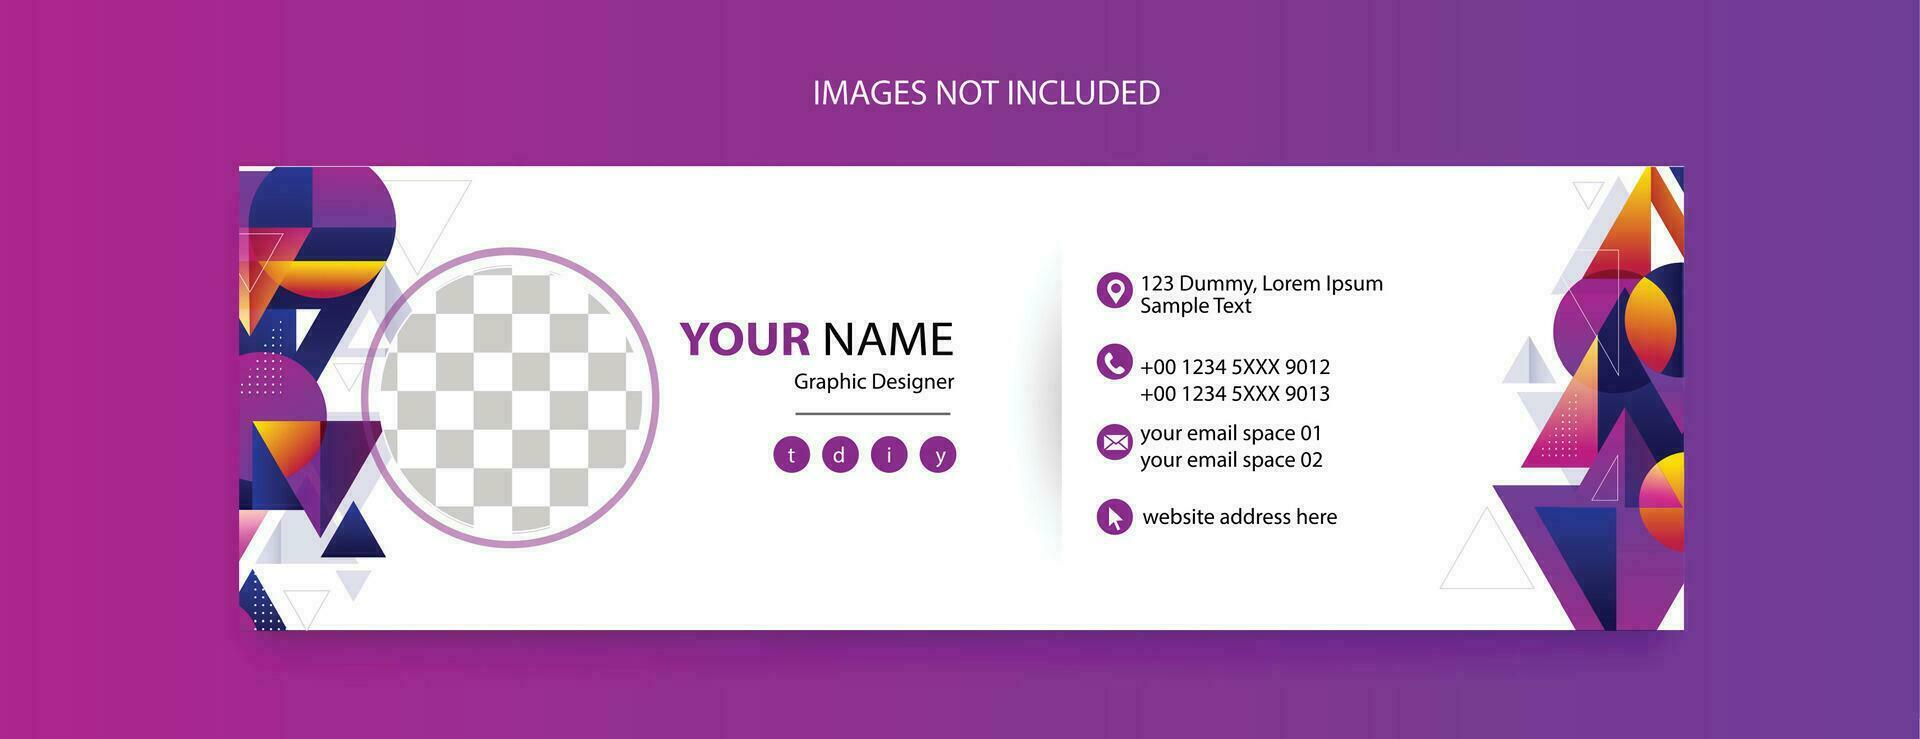 email footer template design for business promotional vector